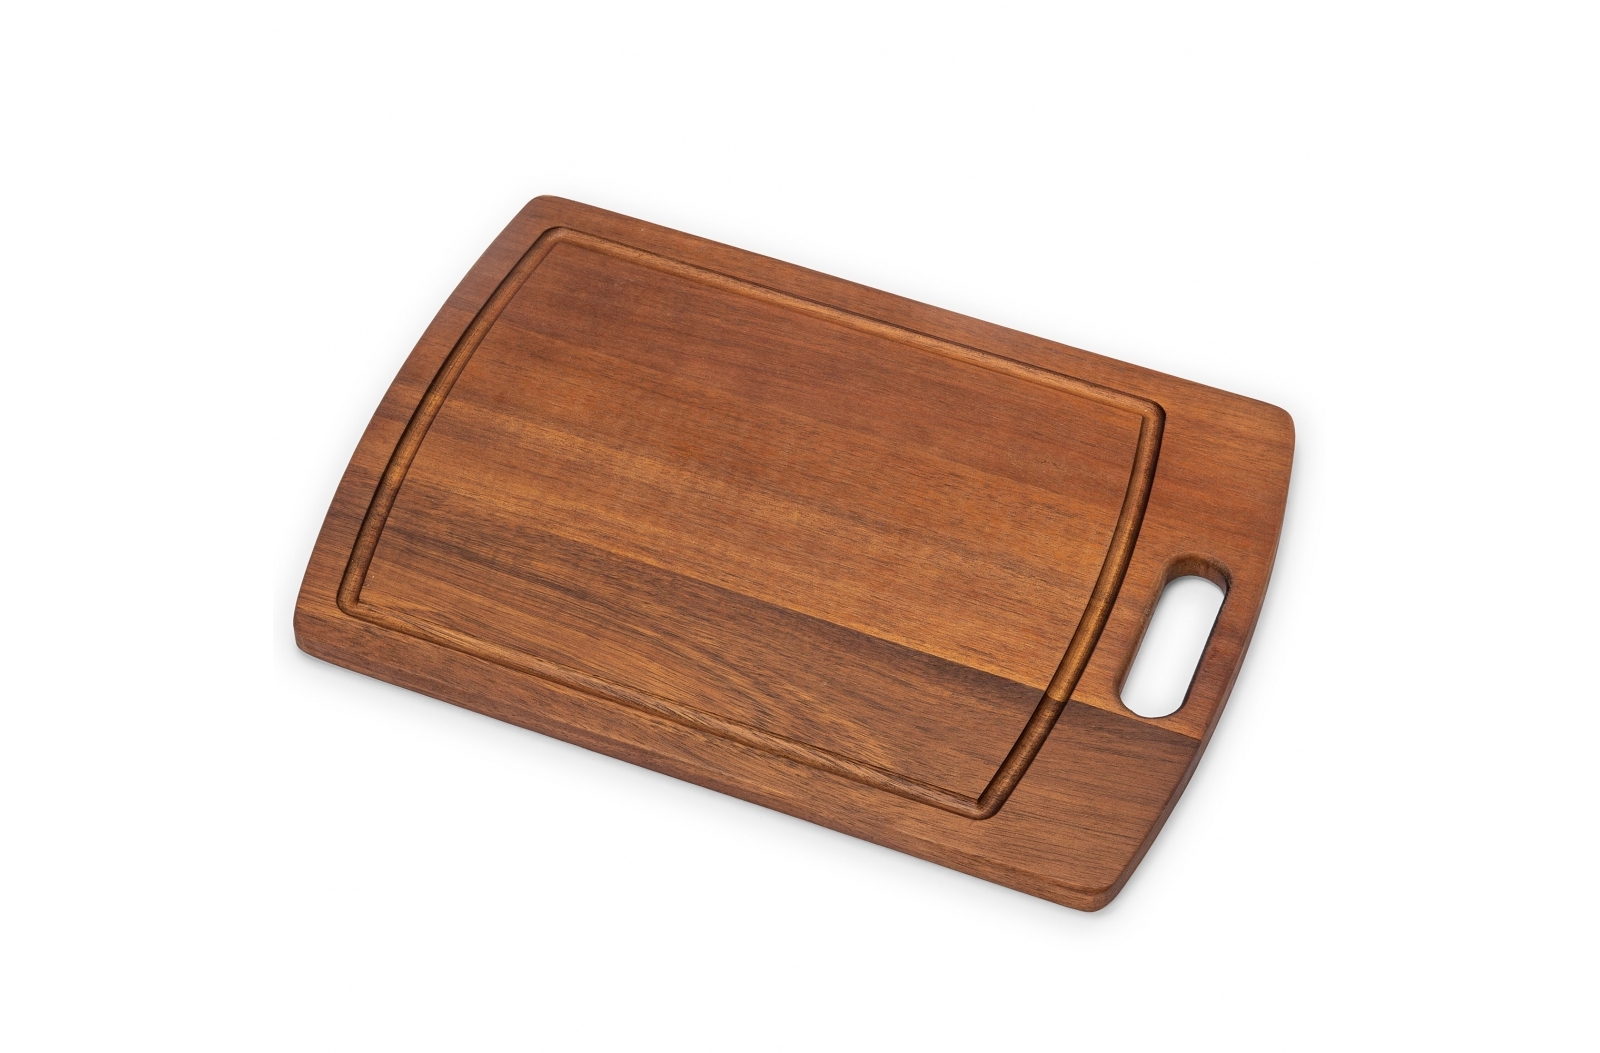 This is a cutting board made from acacia, outlined in Aldbourne A finish which imparts sheen and makes it visually appealing. Its surface is easy to clean and maintain, offering both functionality and style to the discerning user. - Ballater